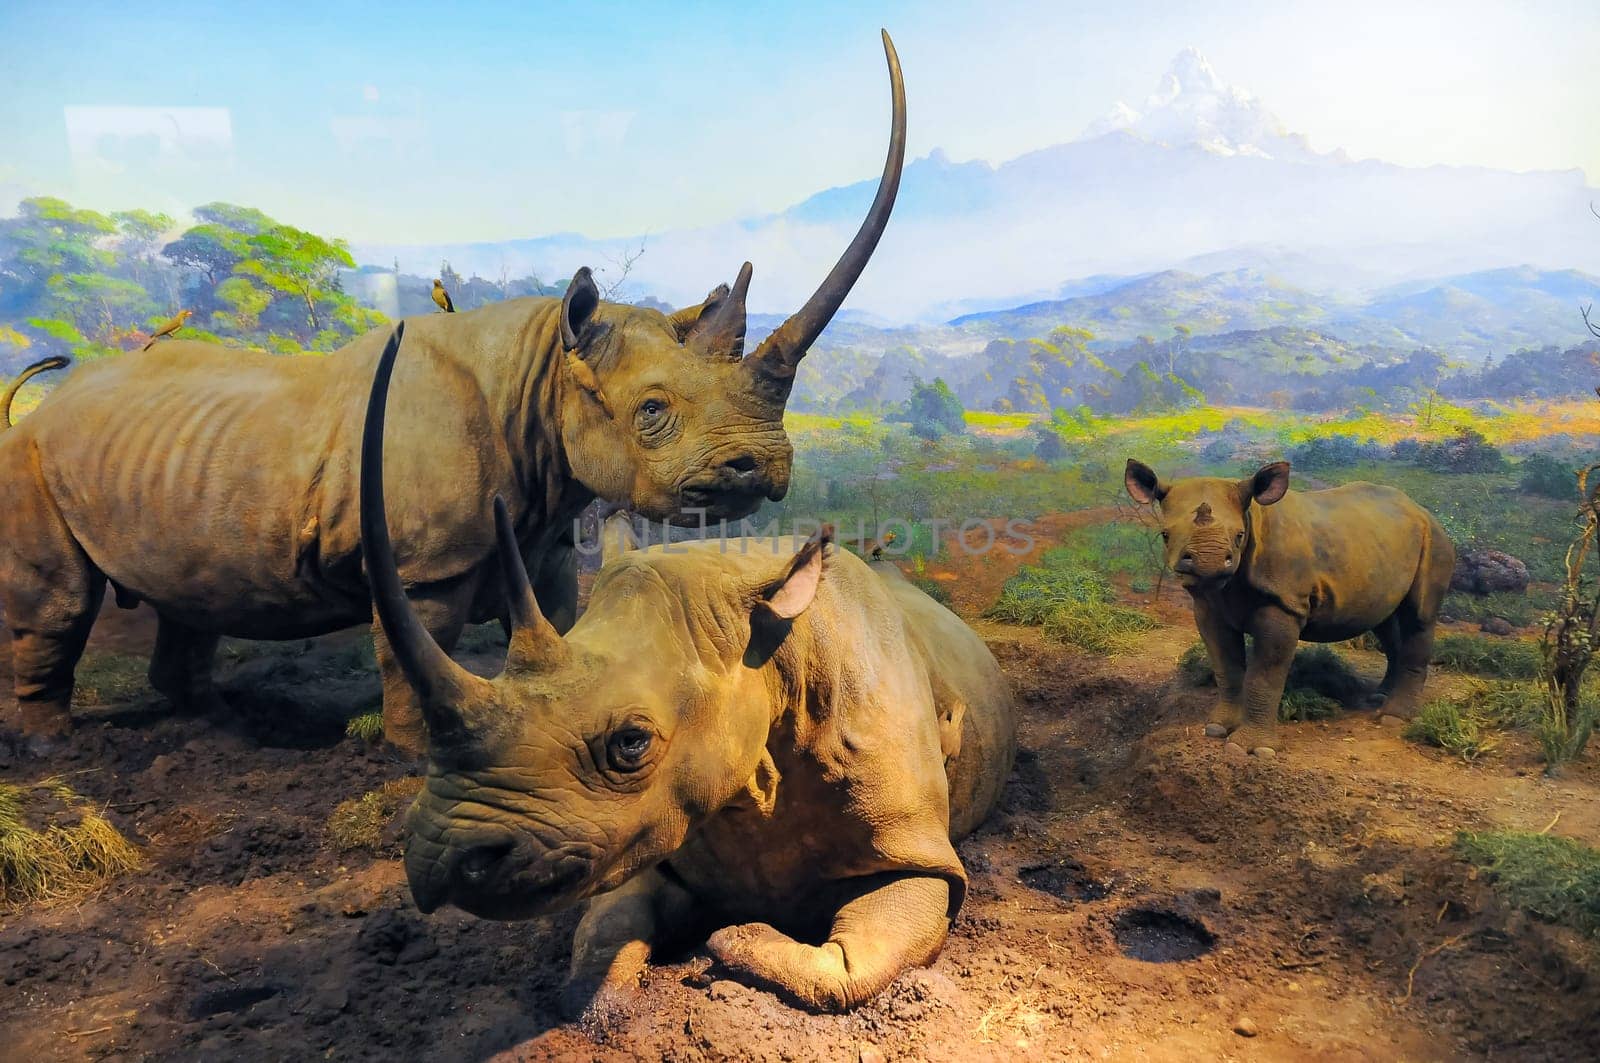 NEW YORK, USA - DECEMBER 05, 2011: Rhinoceroses, or better known as rhinos on display at the Museum of National History, USA by Hydrobiolog